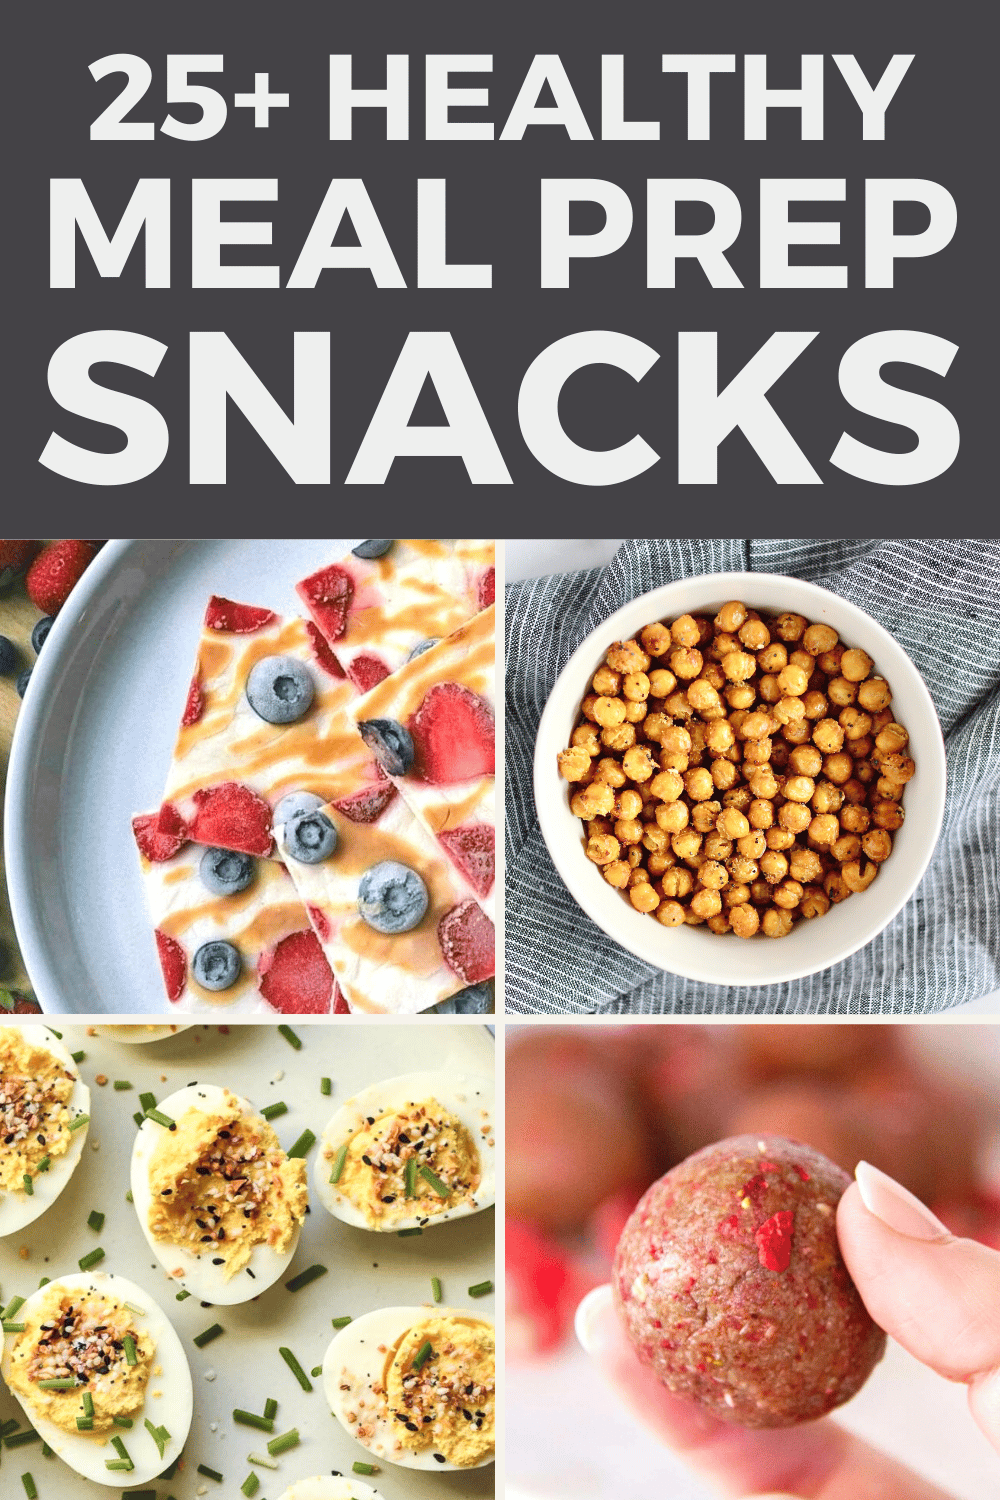 Snack Meal Prep - 25+ Healthy Recipes to Try